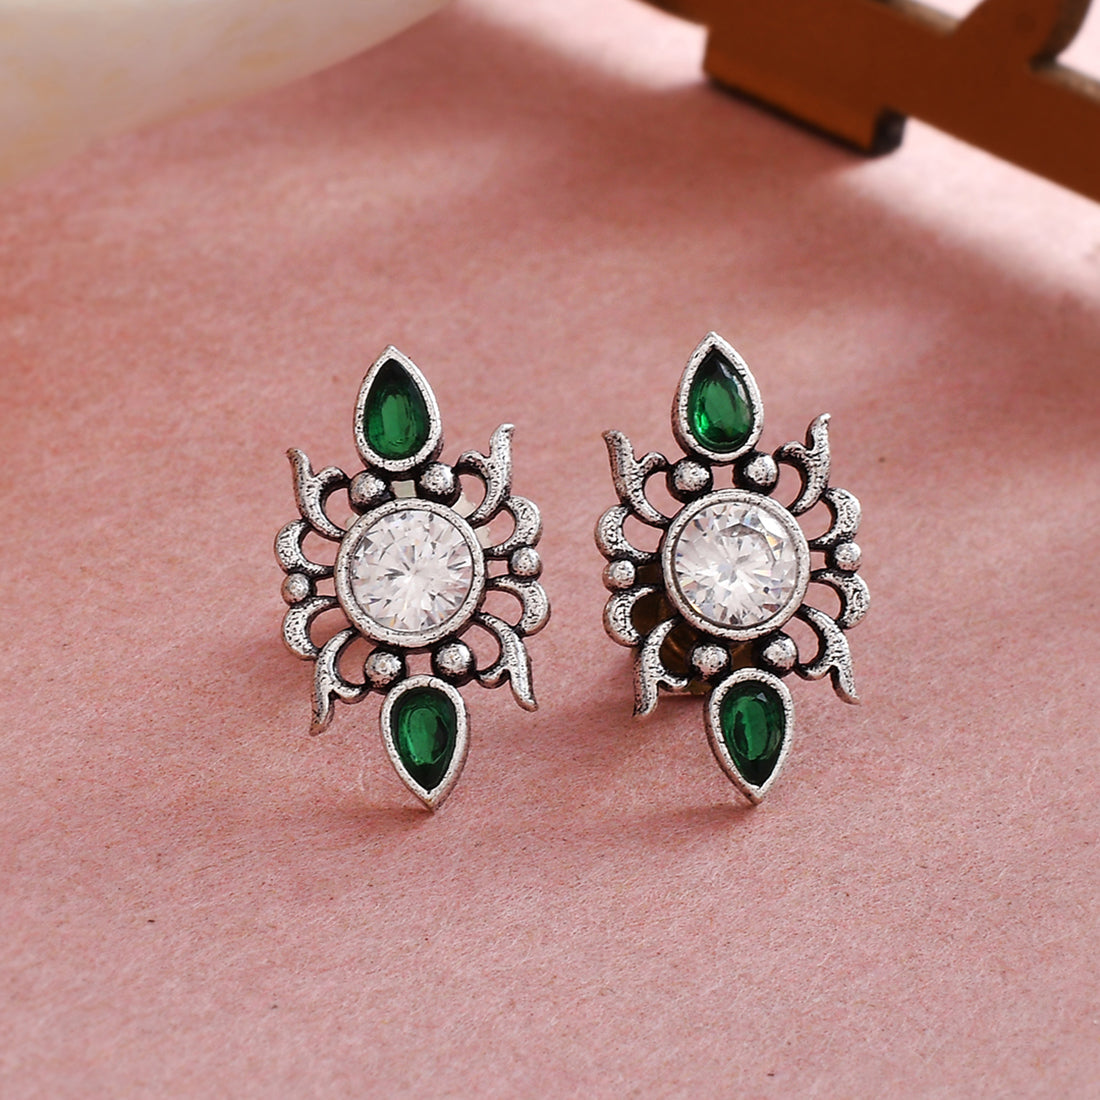 Women's Abharan Casual White And Green Stones Stud Earrings - Voylla